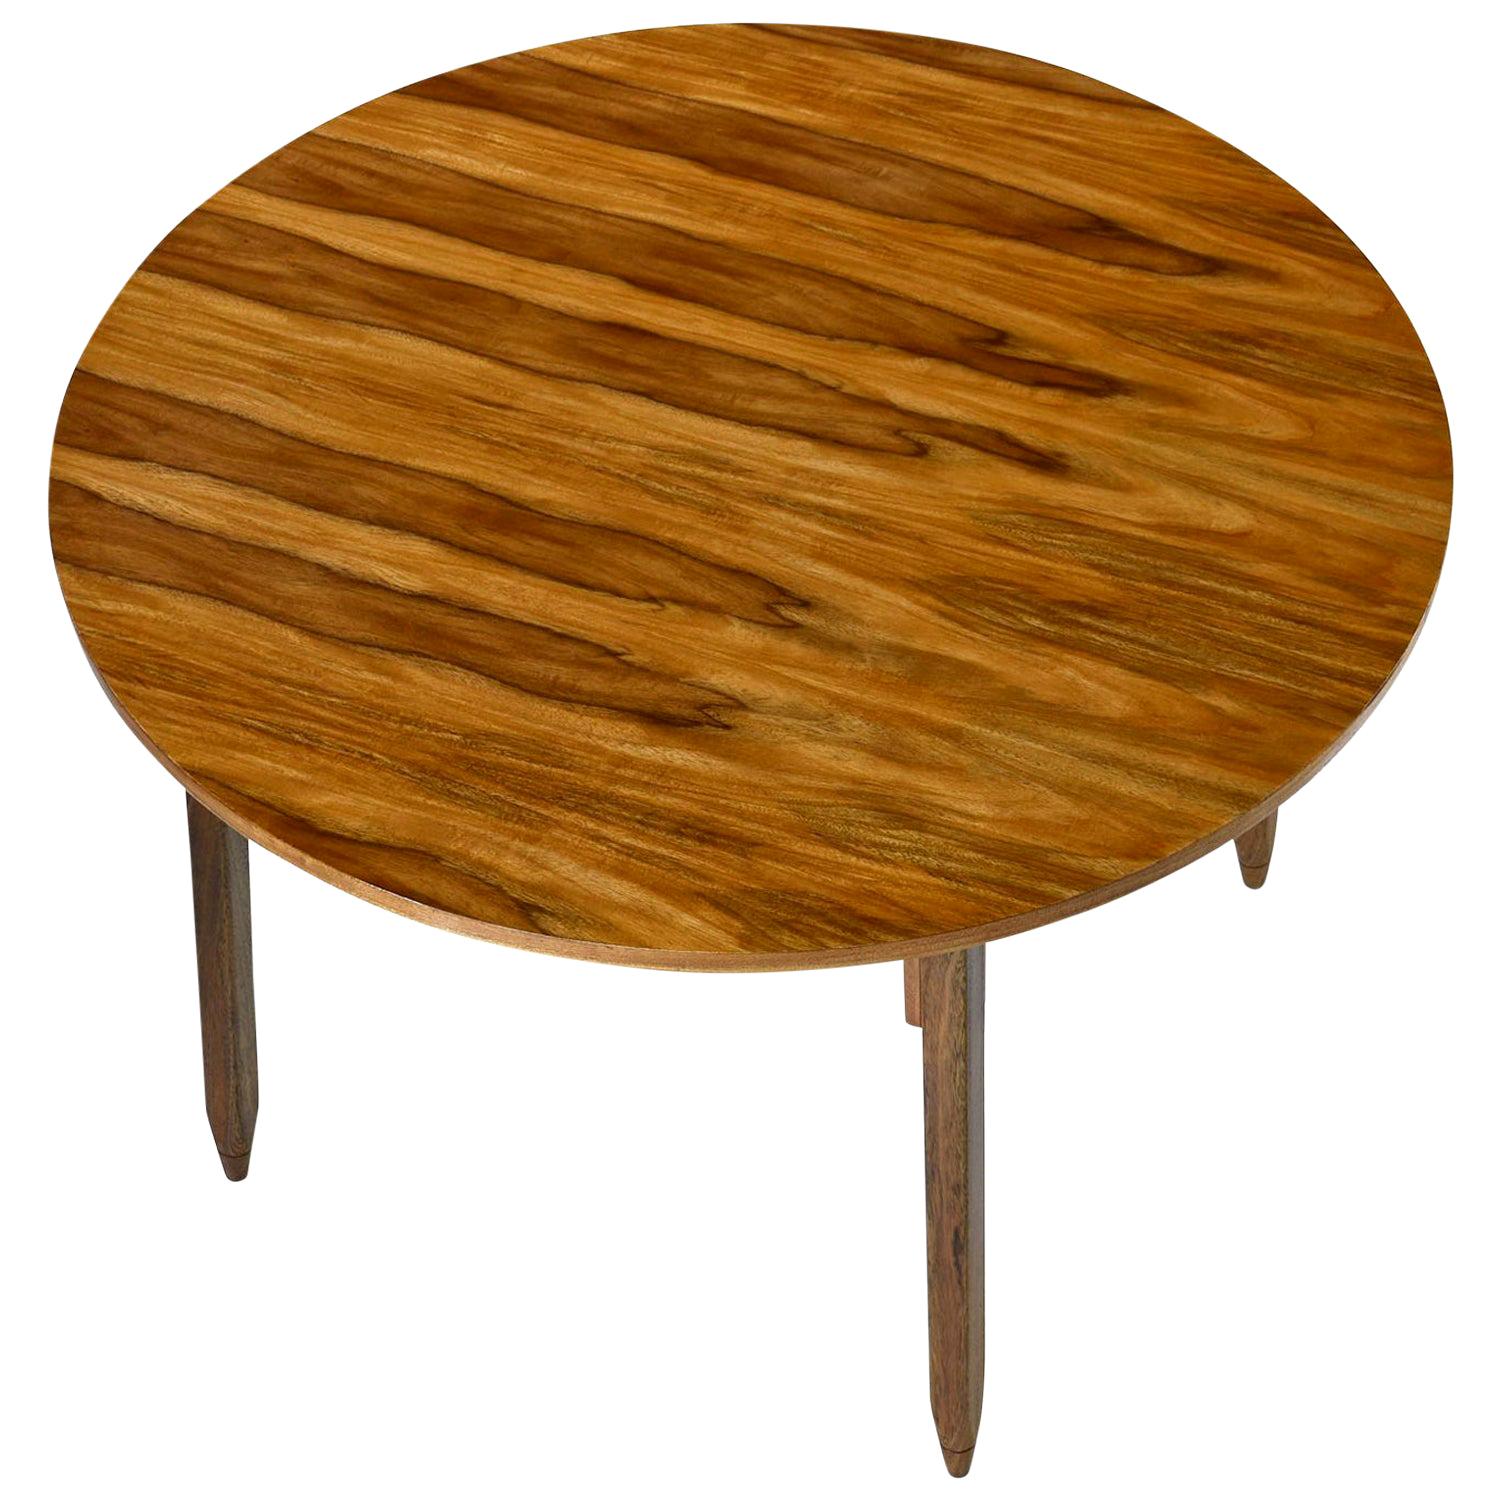 Arte Sano White Walnut "Butternut" Round Dining Table, Made in Colombia